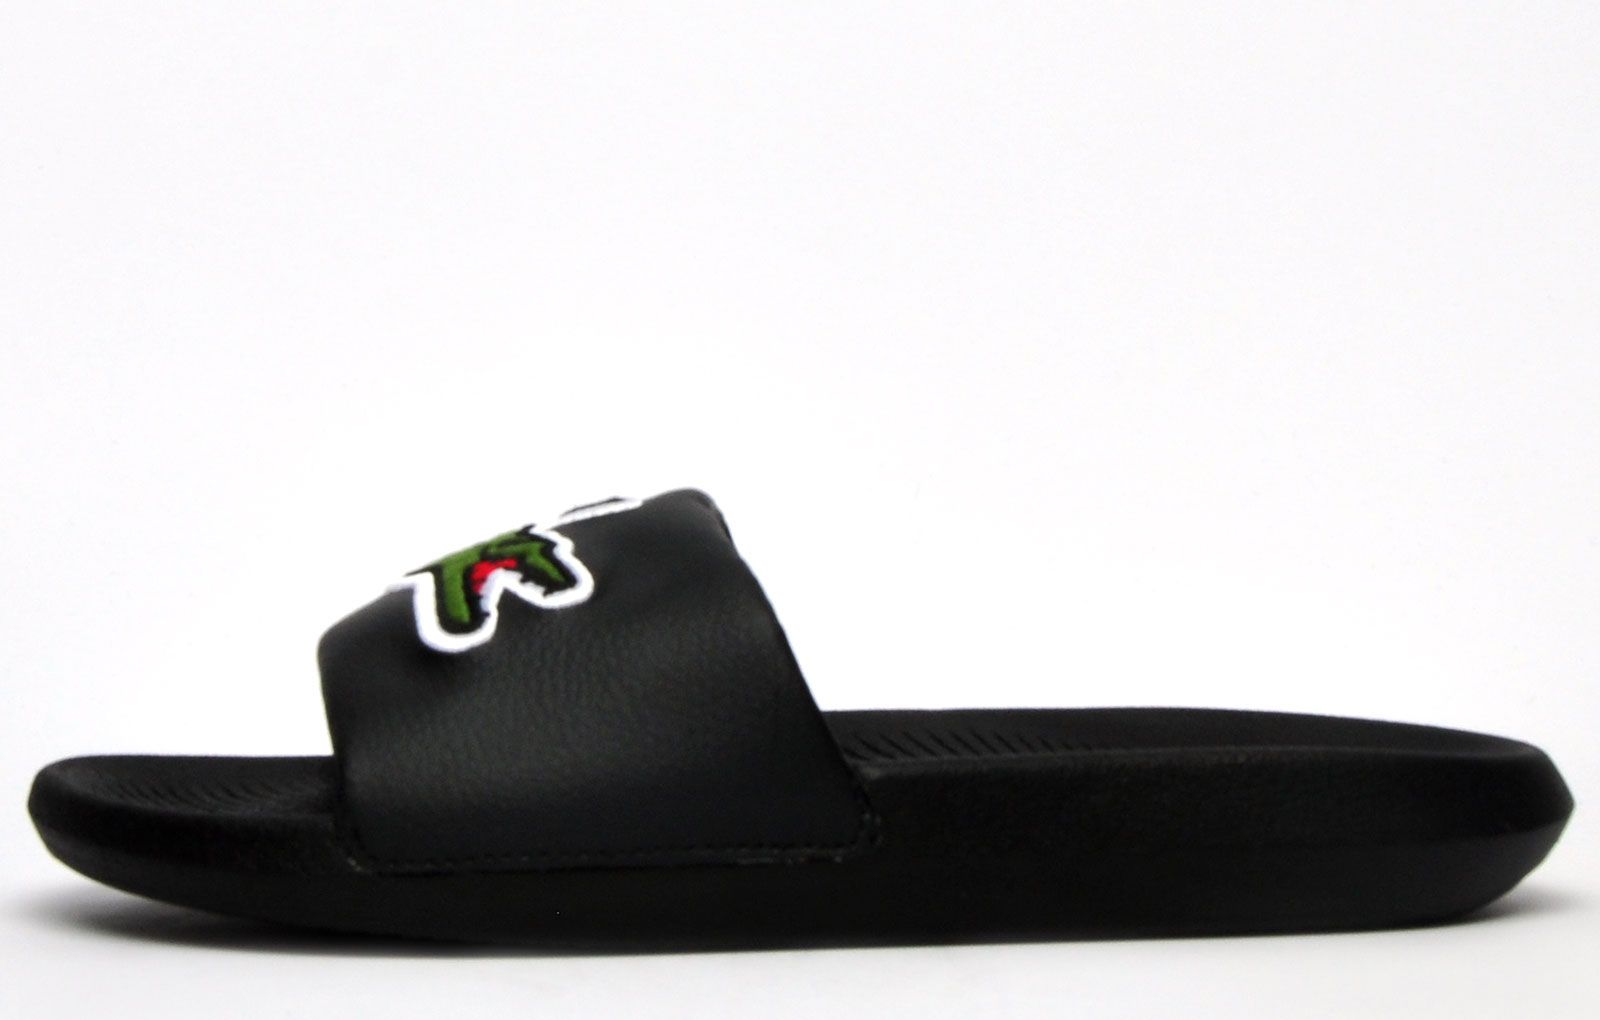 Step into eye catching summer style with these mensCroco Slides from Lacoste. In a bang on trend colourway, these designer sandals are delivered in a smooth synthetic upper with croc detailing across the forefoot foot strap. The stylish upper delivers a super comfy footbed which moulds to your feet delivering the perfect fit and feel while the grippy outsole will keep you sure and safe around the pool or in the shower. These designer slides are finished with eye catching Lacoste branding throughout just in case you want a sign of approval that youre wearing cool on-trend style this summer season 
 
 - Stylish synthetic upper
 - Comfort moulded footbed
 - Grippy outsole
 - Slip on wear
 - Iconic Lacoste branding throughout
 Please Note: These slides are supplied poly bagged (without box)
 These Lacoste Slides are sold as B grades which means there may be some very slight cosmetic issues on the shoe and they come in a poly bag. There could be occasional issues with wrong swing tags being allocated to wrong shoes by Lacoste themselves which could result in some size confusion but you must take the size IN THE SHOE as the size that the shoe actually is ( not what is on the tag ). We have checked most of the shoes and in our opinion,all are practically perfect without any blemishes on them at all and in essence if the shoes did not have the letter B denoted on the swing tag you would presume these were perfect shoes. All shoes are guaranteed against fair wear and tear and offer a substantial saving against the normal high street price. The overall function or performance of the shoe will not be affected by any minor cosmetic issues. B Grades are original authentic products released by the brand manufacturer with their approval at greatly reduced prices. If you are unhappy with your purchase, we will be more than happy to take the shoes back from you and issue a full refund